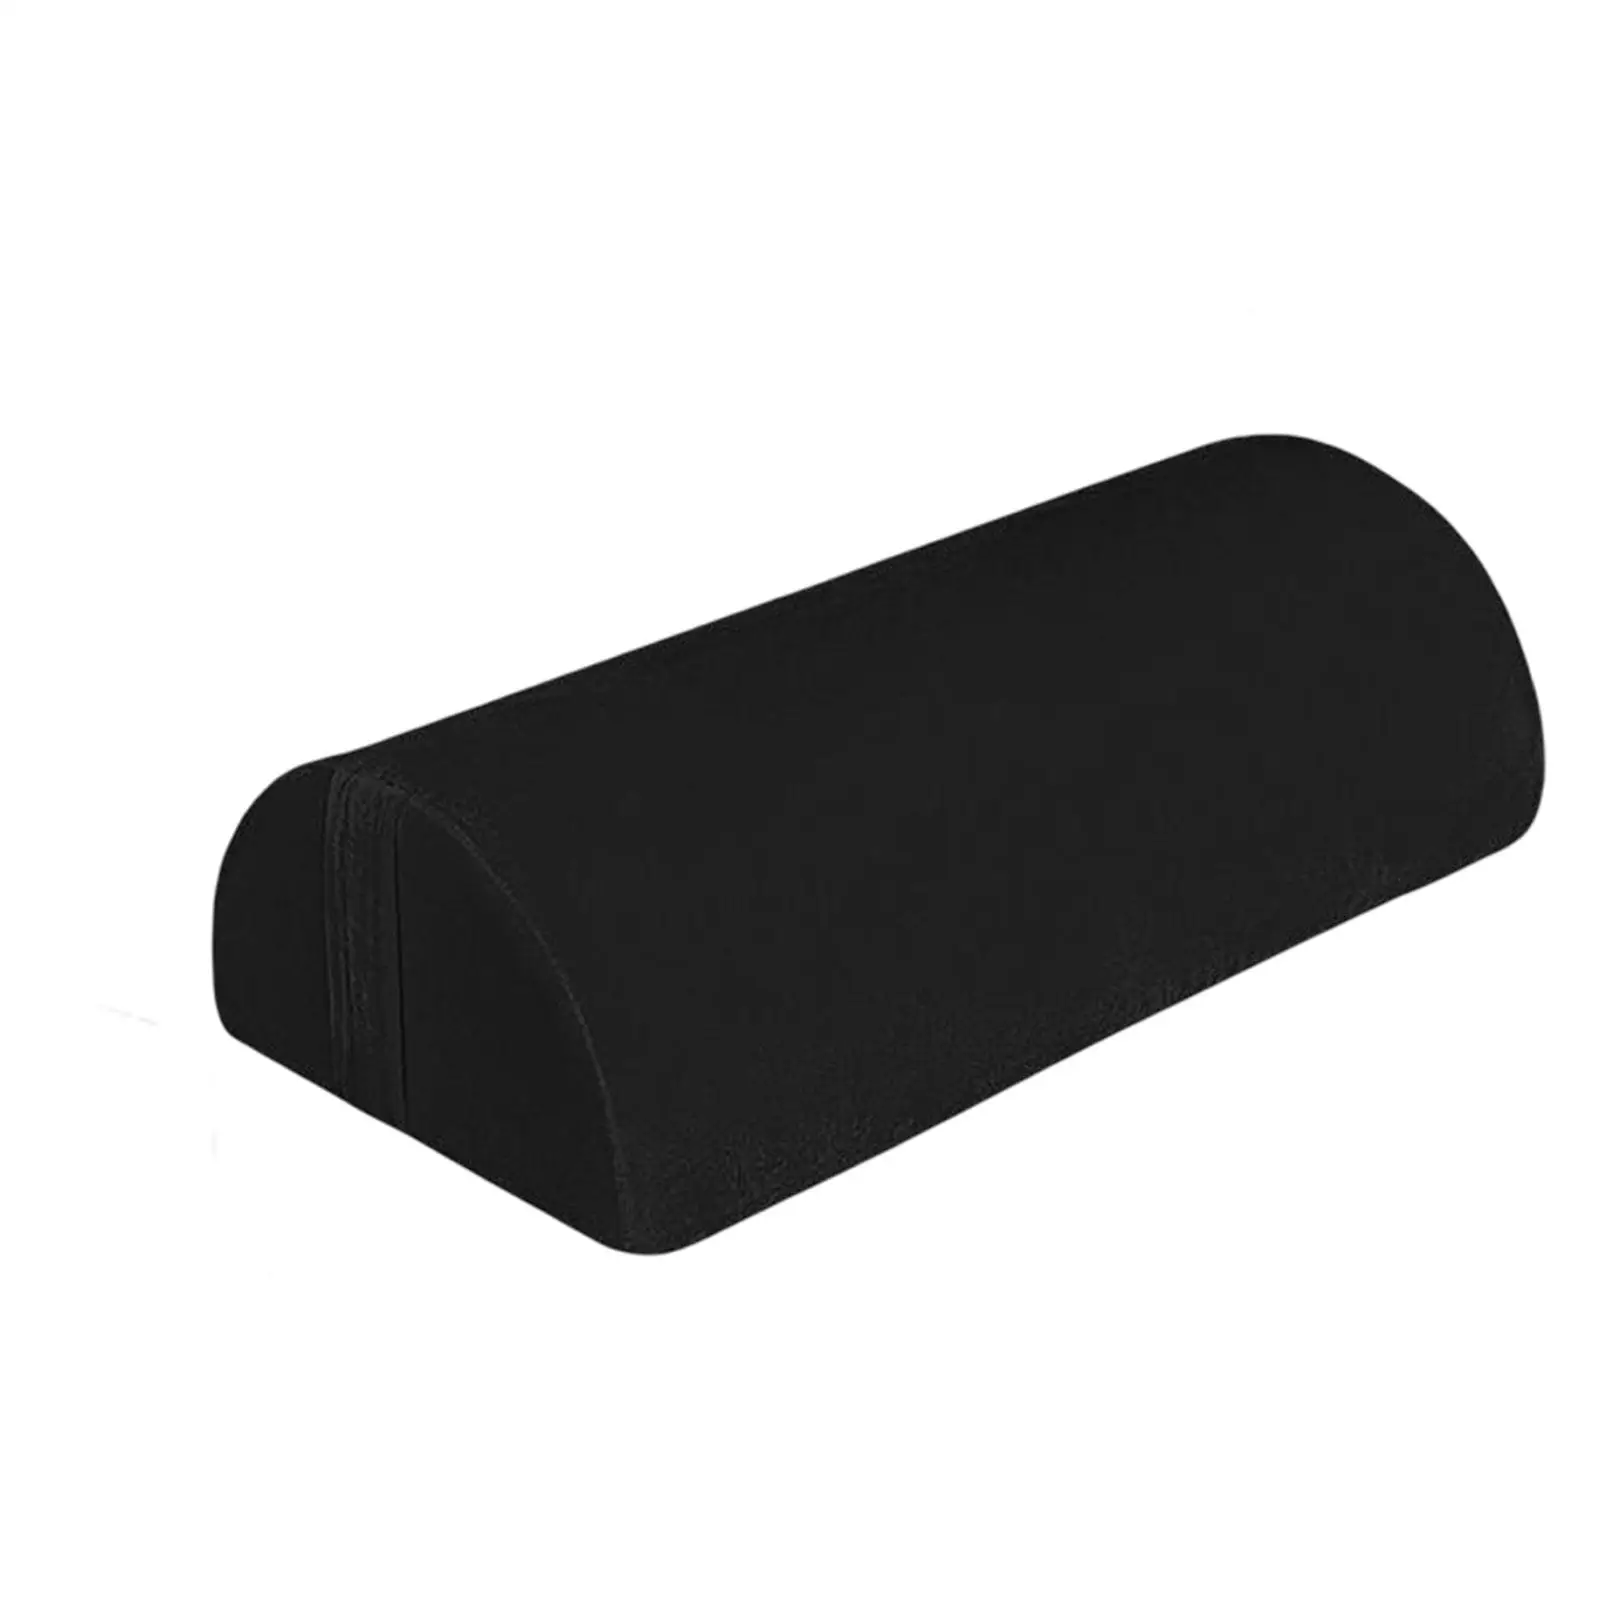 Comfort Footrest Pillow, Feet Cushion ,Soft Non Slip Ergonomic Foot Stool for Travel ,Office Accessories ,Computer, Home Gaming